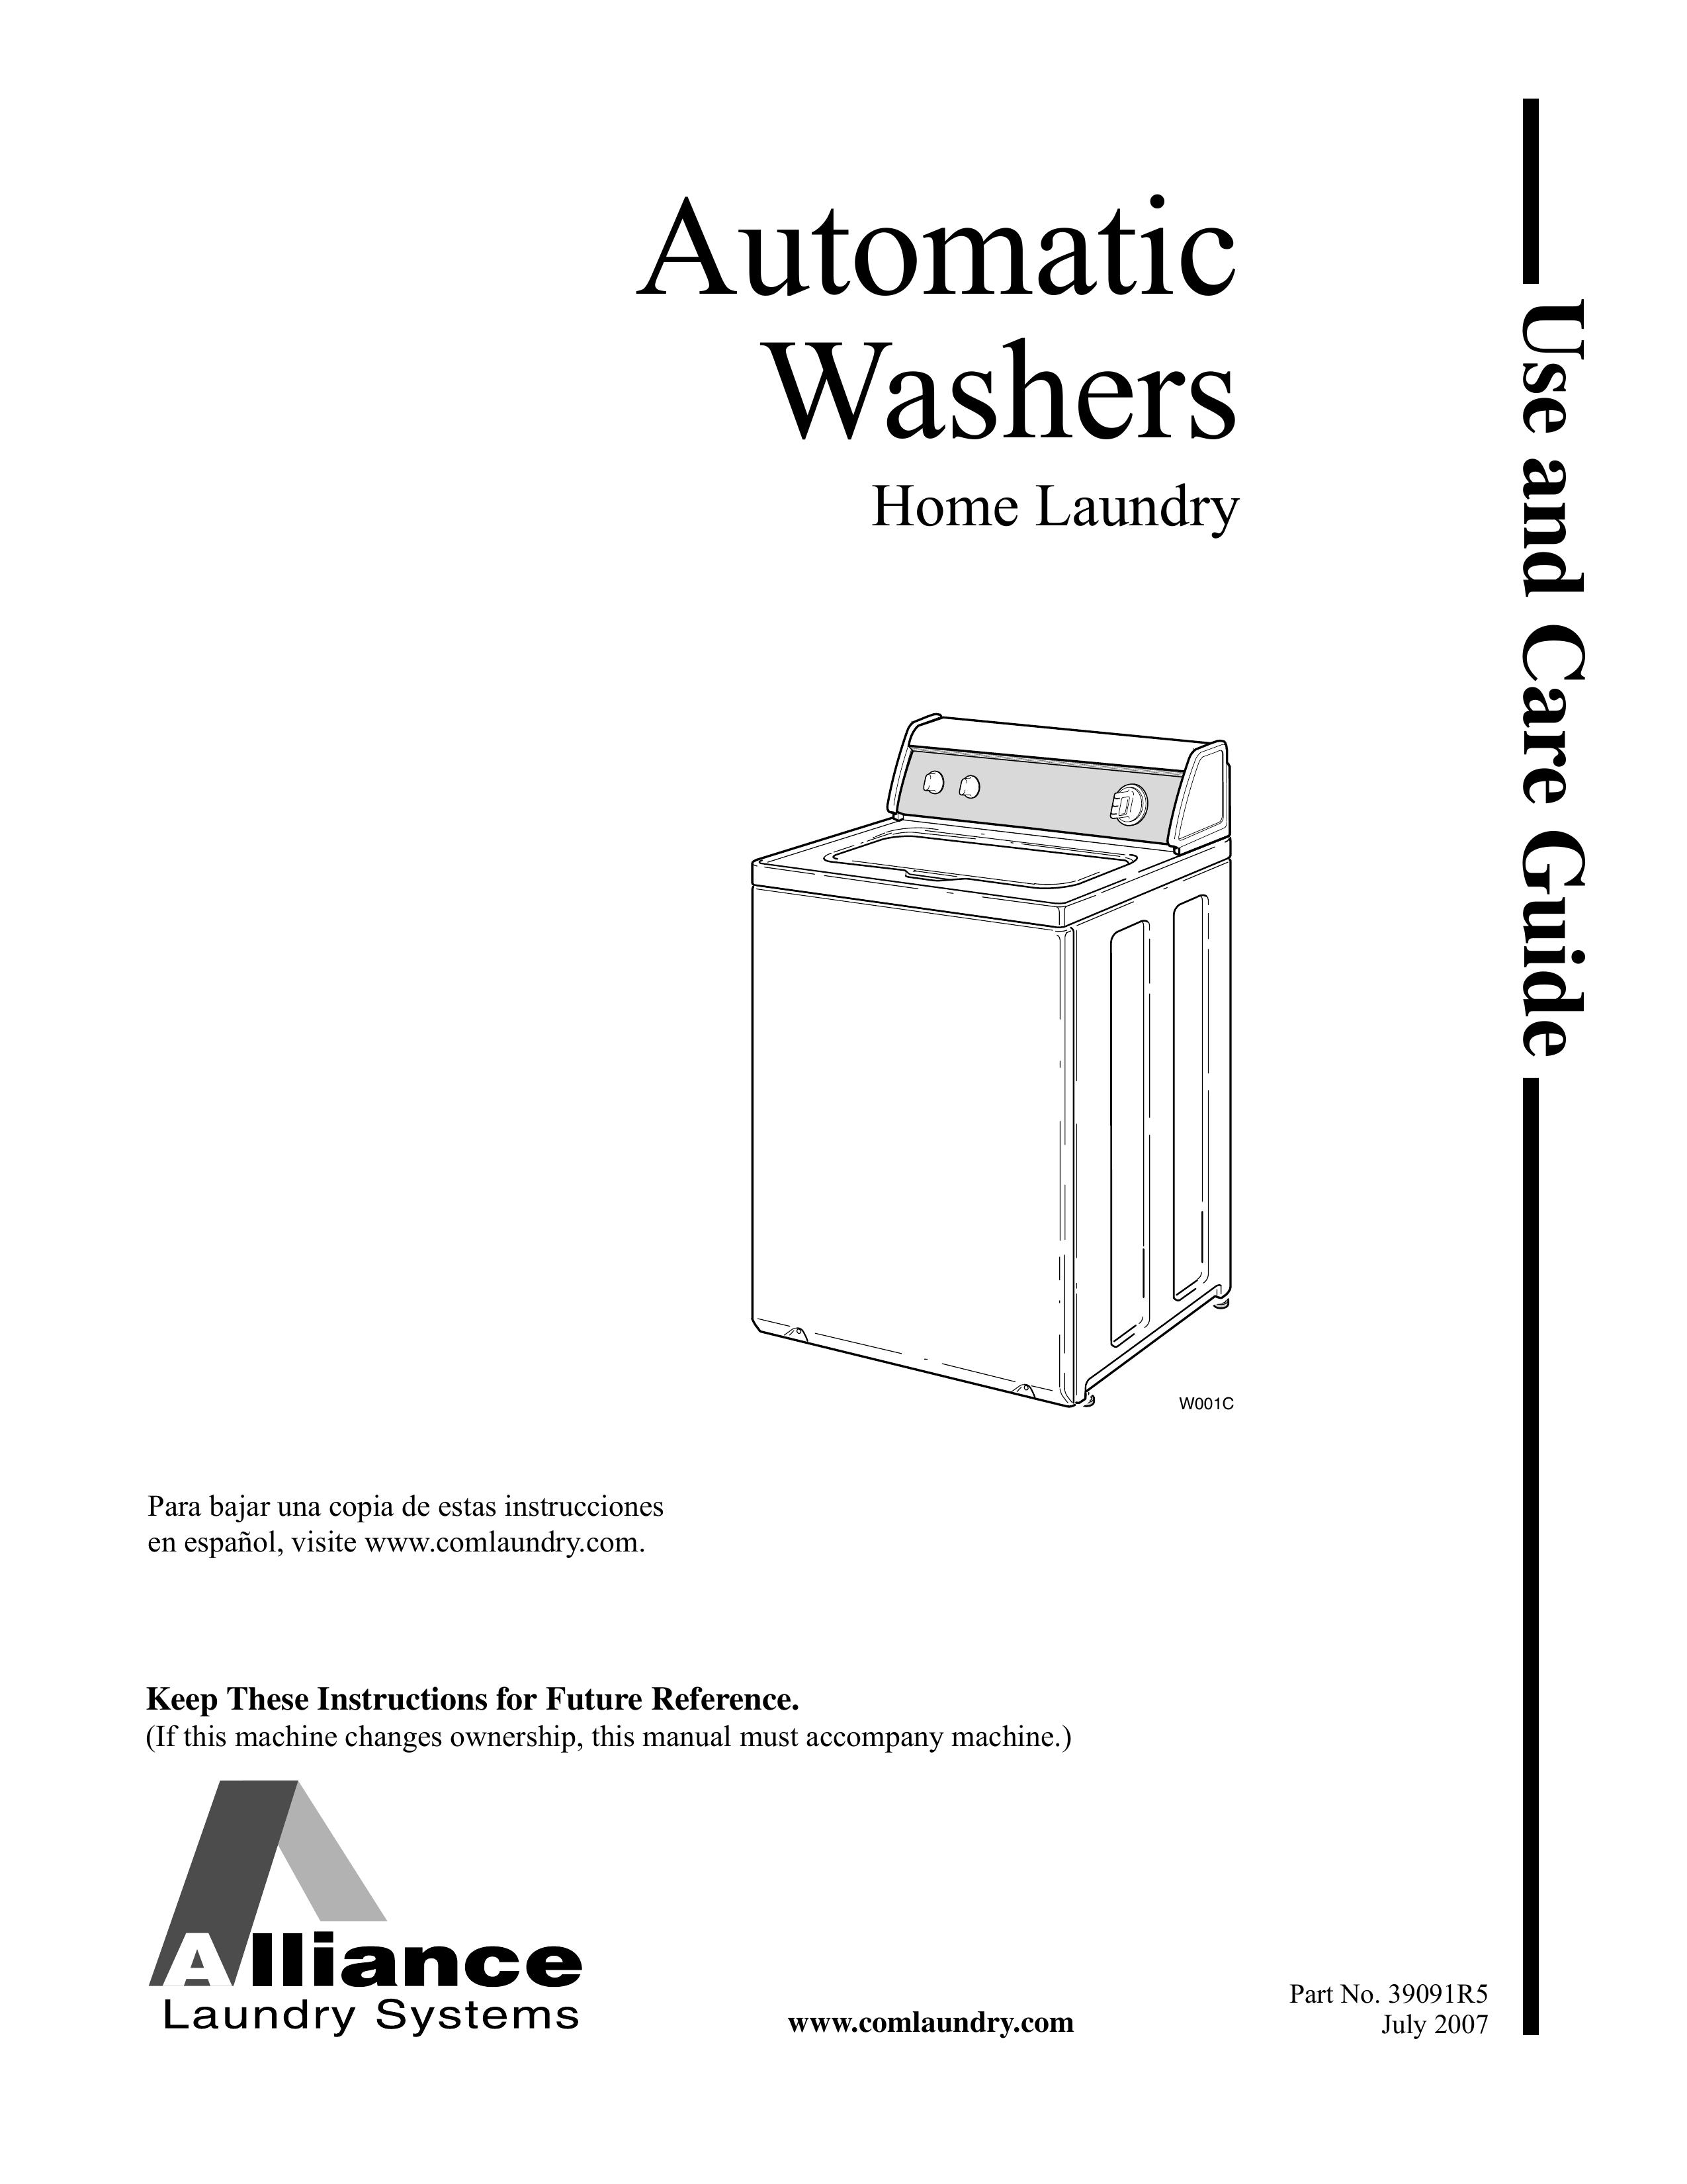 Alliance Laundry Systems LWS01N Washer/Dryer User Manual